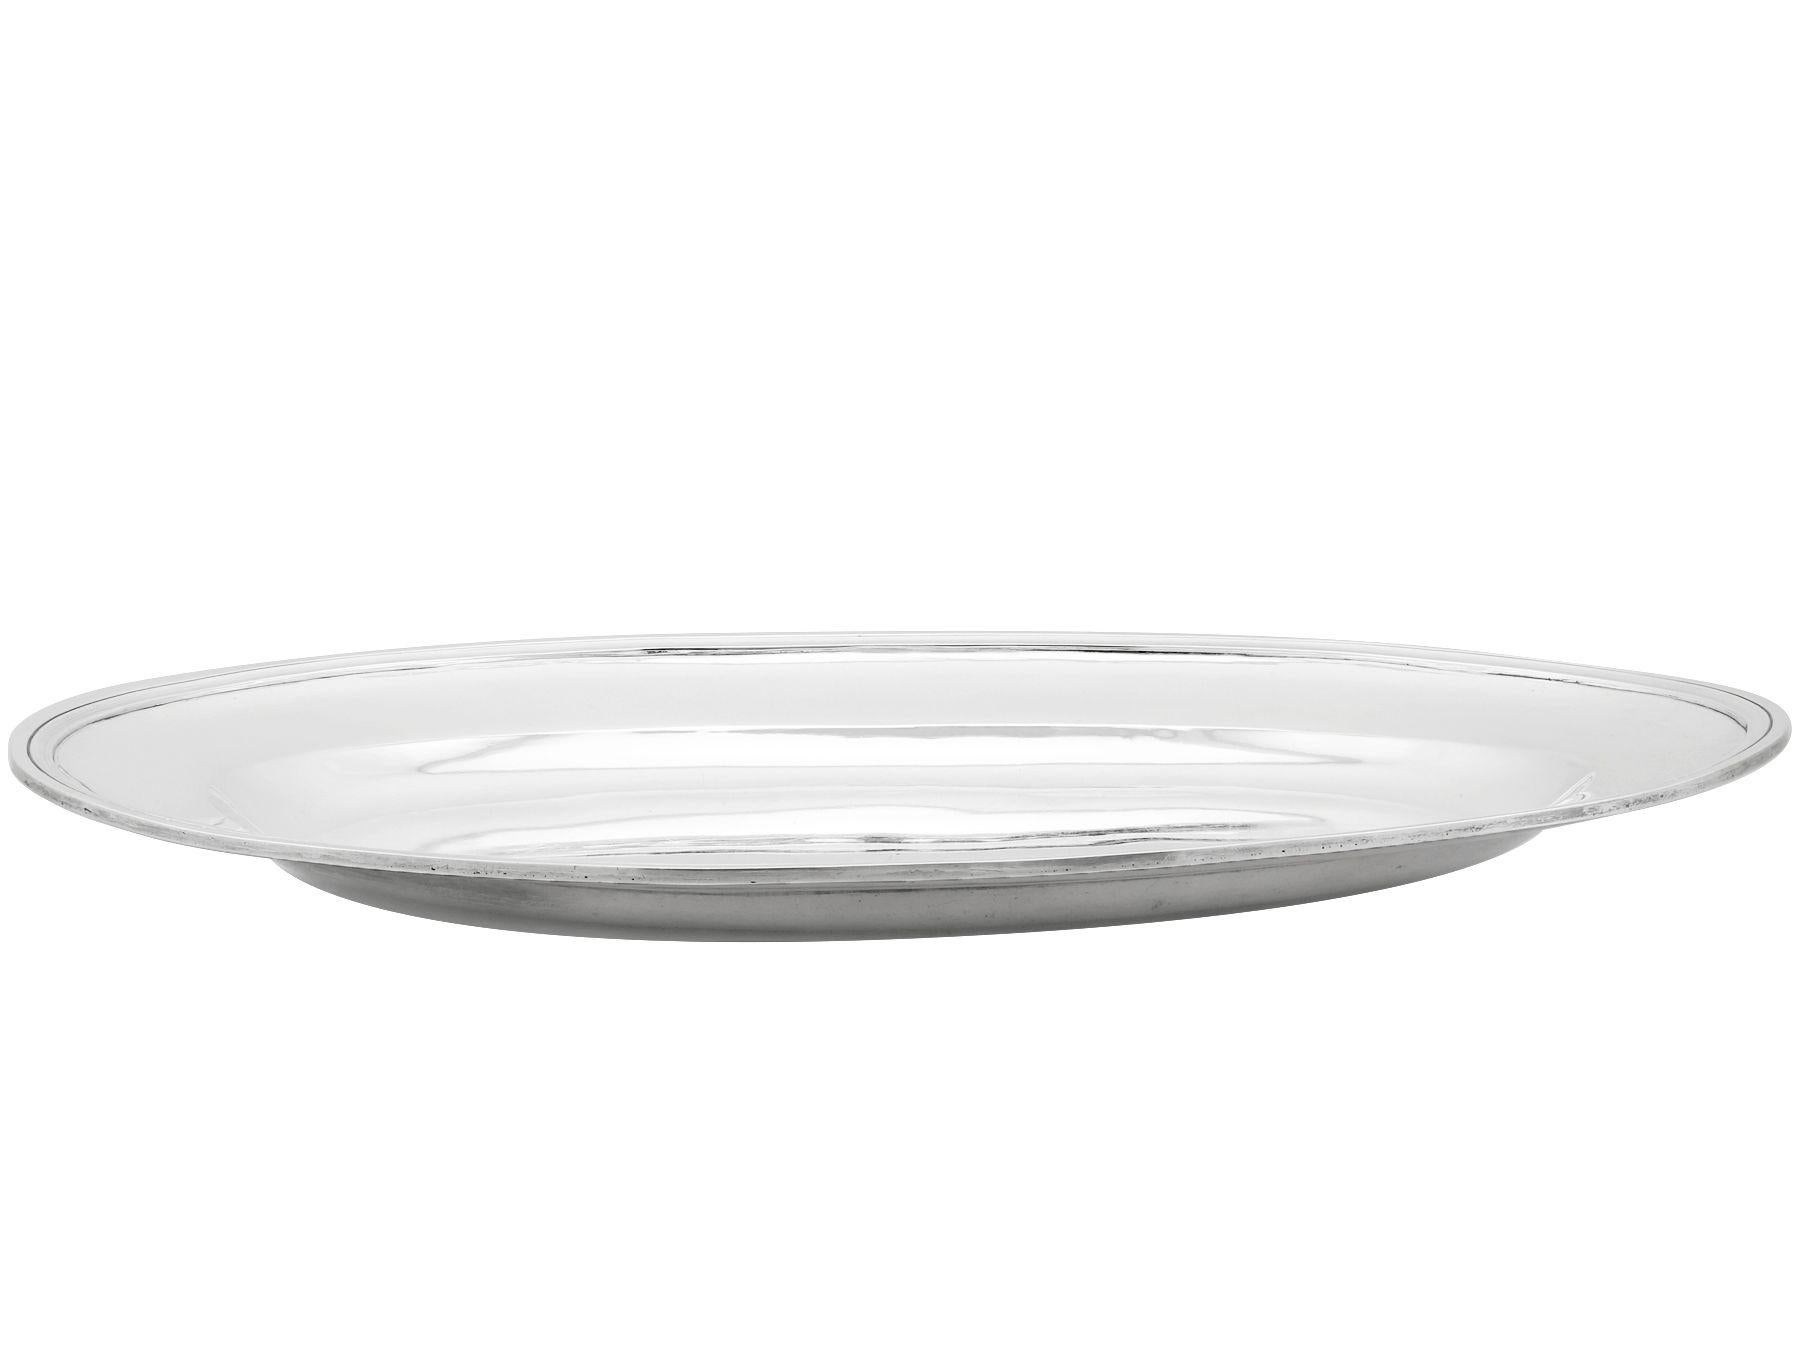 An exceptional, fine and impressive, antique Italian silver meat / fish platter; an addition to our presentation silverware collection.

This magnificent antique Italian silver platter has an oval form.

The surface of this antique platter is plain